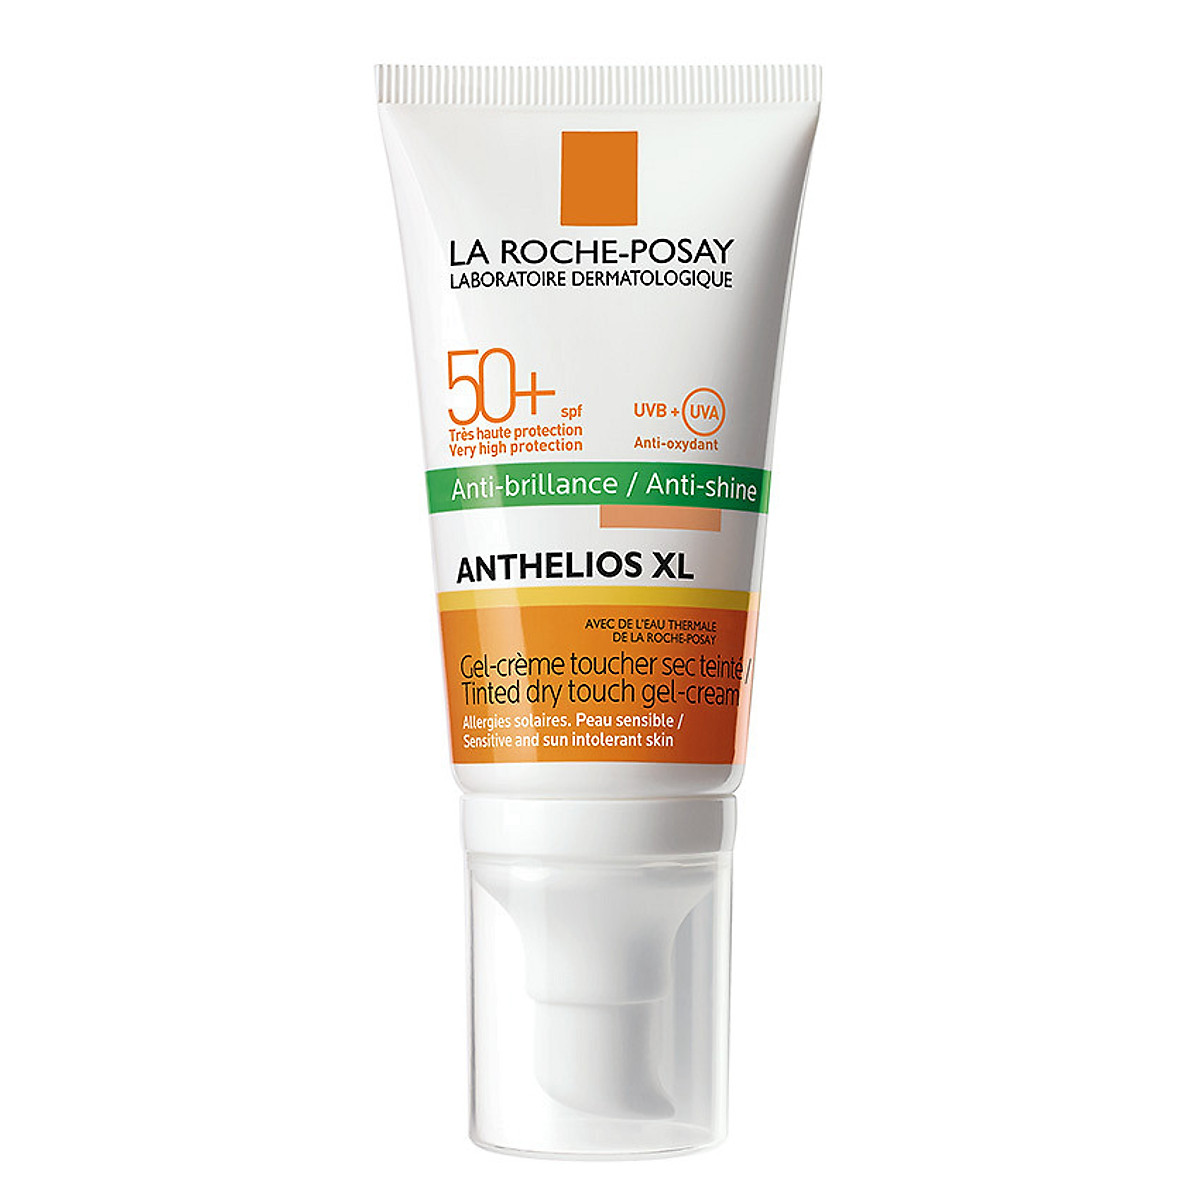 La Roche Posay Anthelios XL Tinted Dry Touch Gel Cream